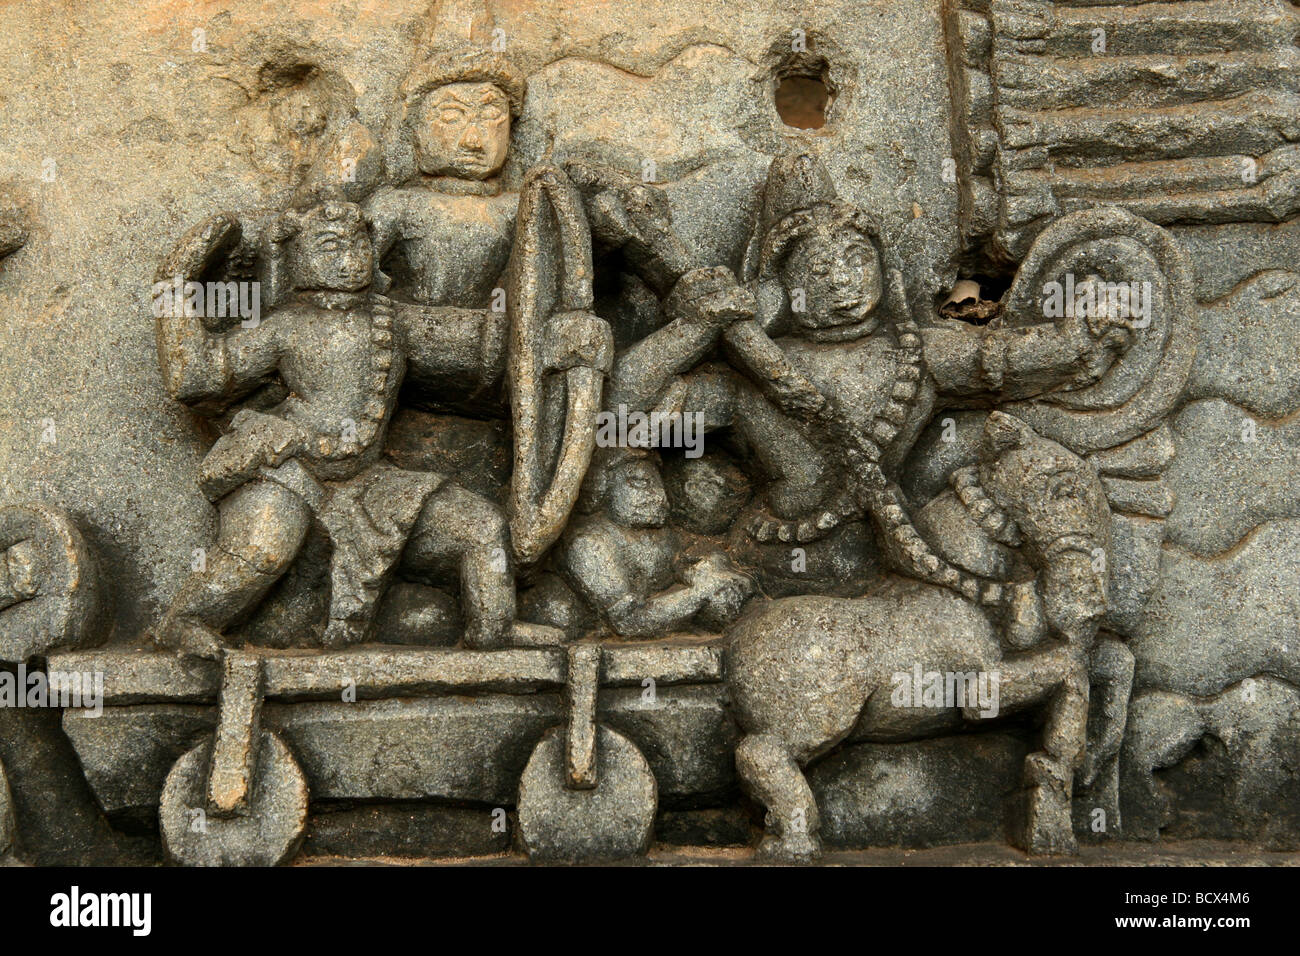 A scene showing warfare among the carvings at the Hoysaleswara temple in Halebid, India. Stock Photo